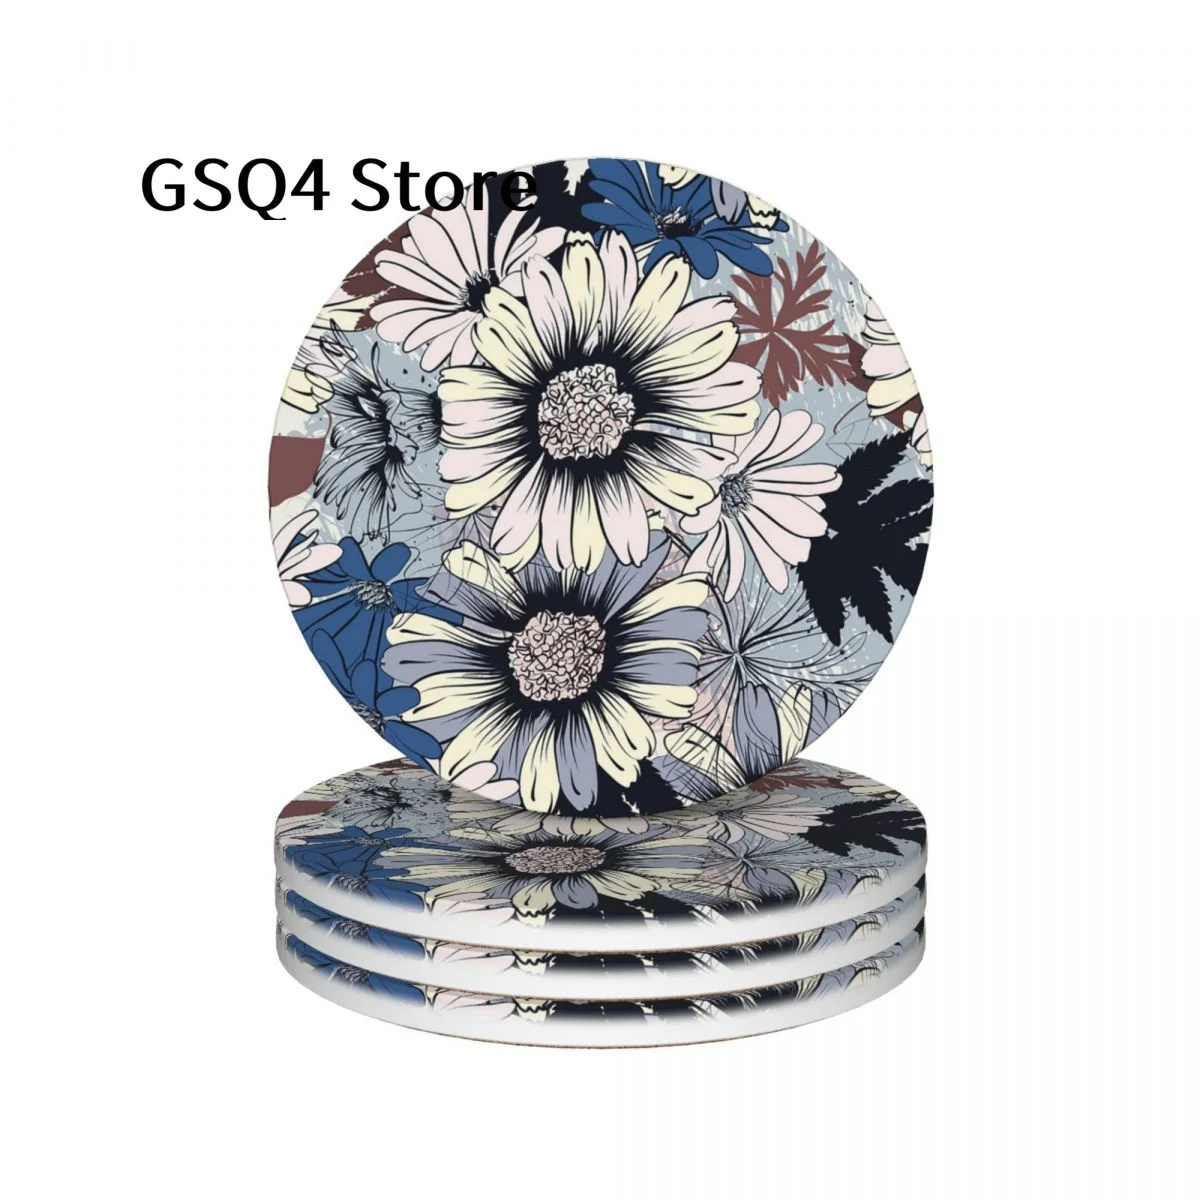 

Floral Flowers Coasters of Drinks Set of 4 Cup Holders Water Absorbing Ceramic Drinks Coaster for Home Kitchen Gift Decor